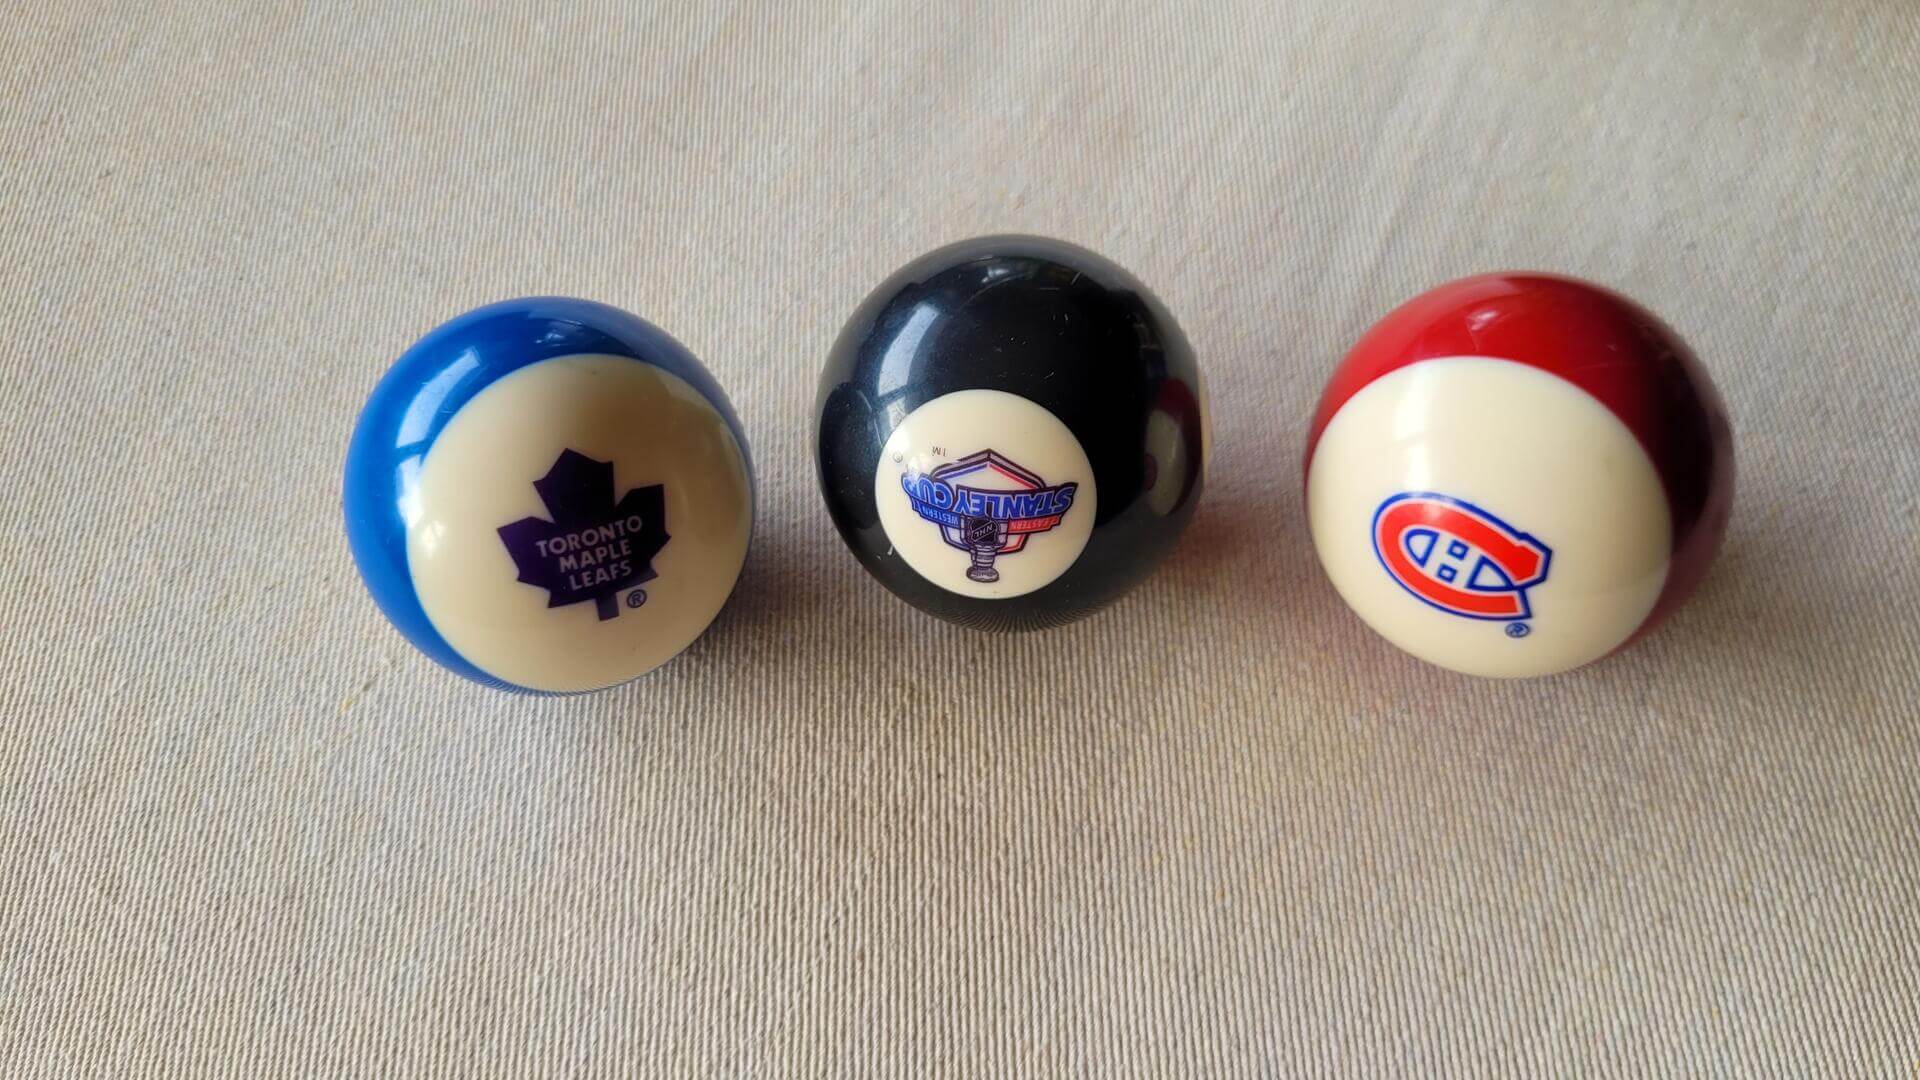 Vintage NHL Hockey billiards pool balls set with blue Toronto Maple Leafs and red Montreal Canadians balls, Stanley Cup 8 ball